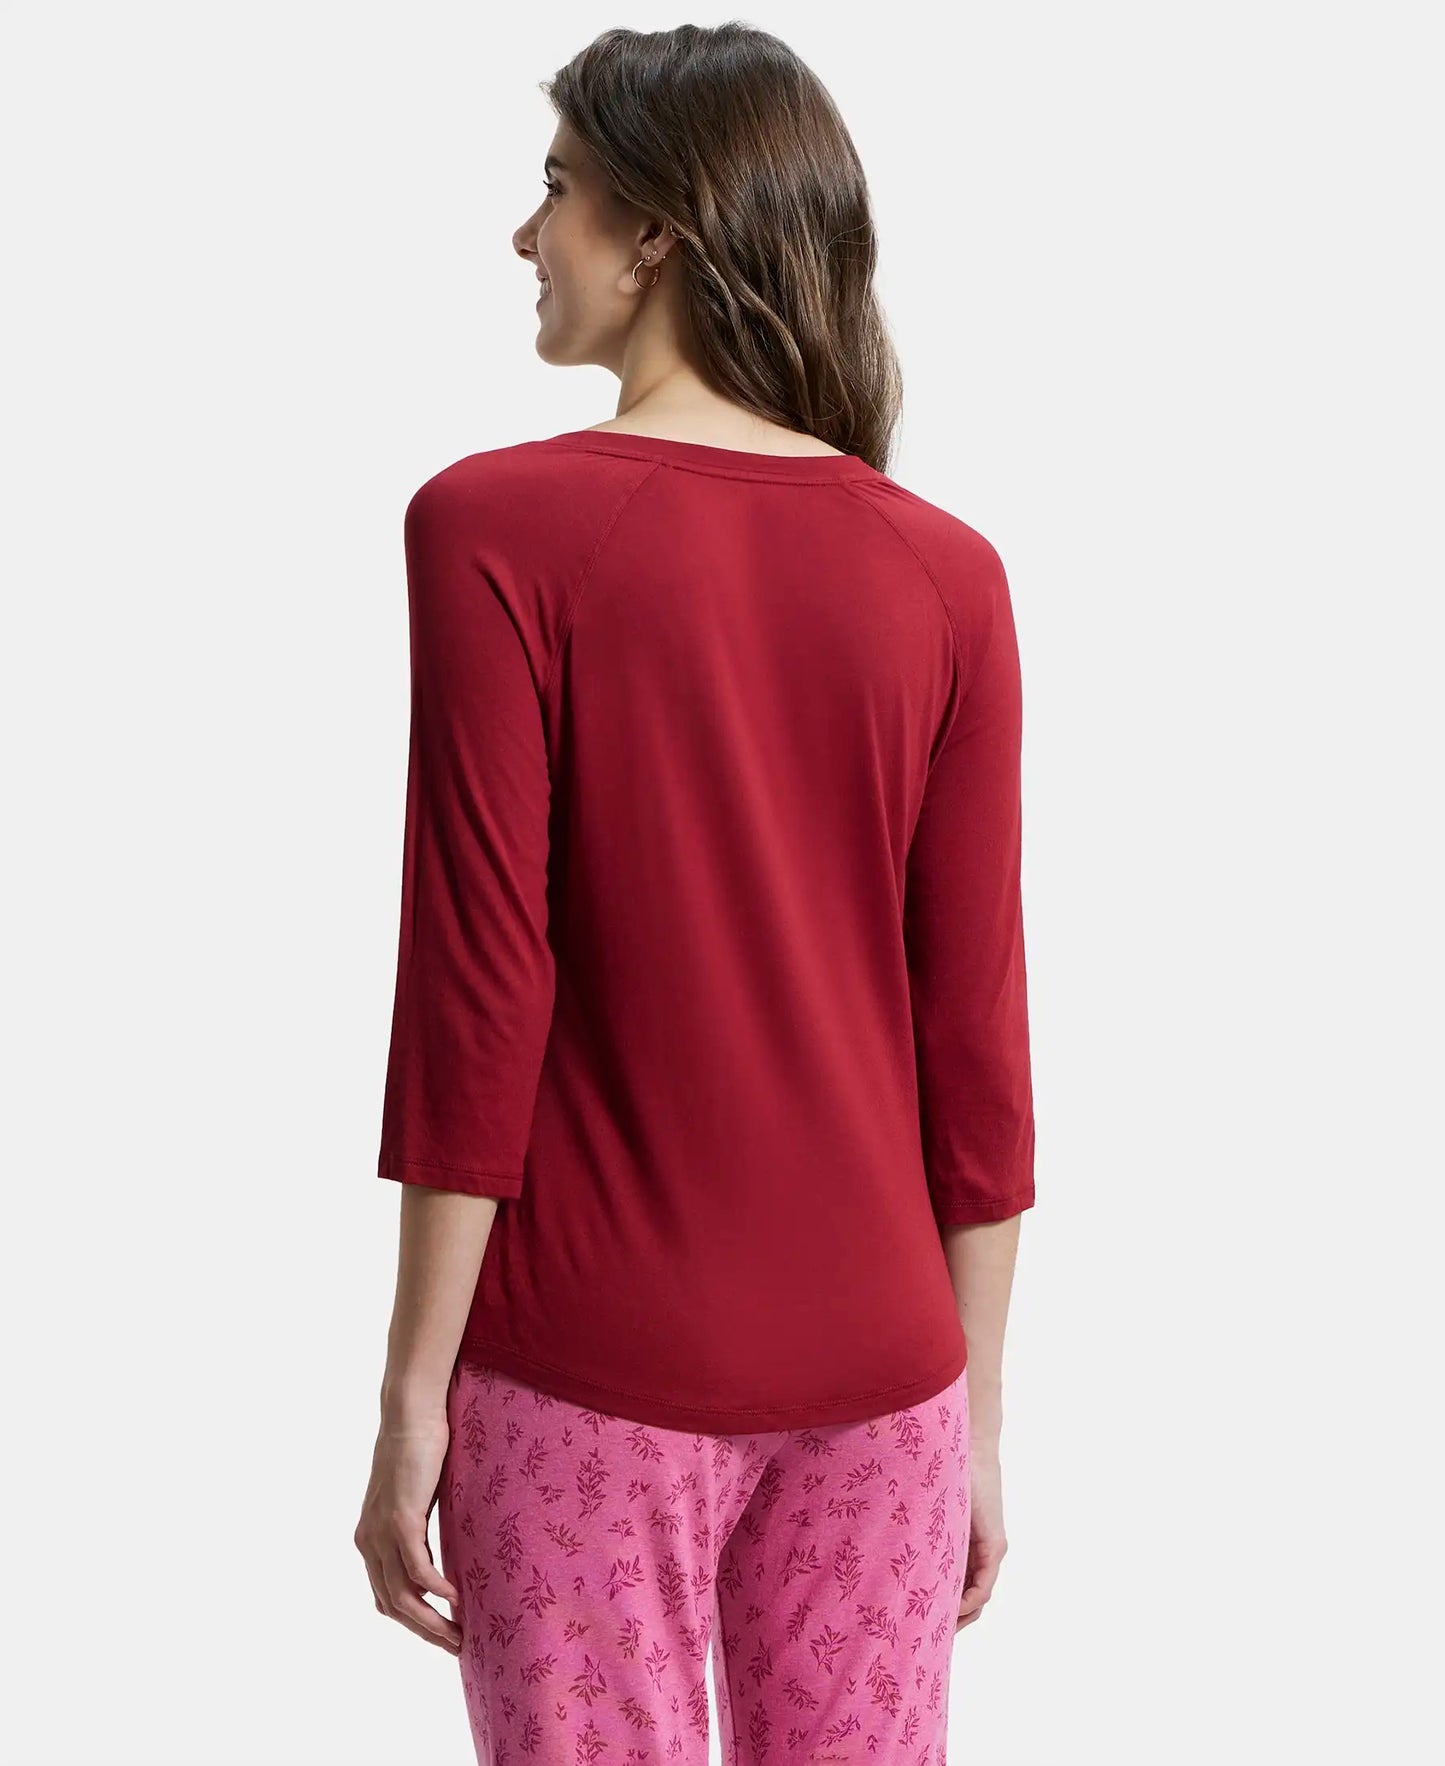 Micro Modal Cotton Relaxed Fit Graphic Printed Round Neck Three Quarter Sleeve T-Shirt - Rhubarb-3